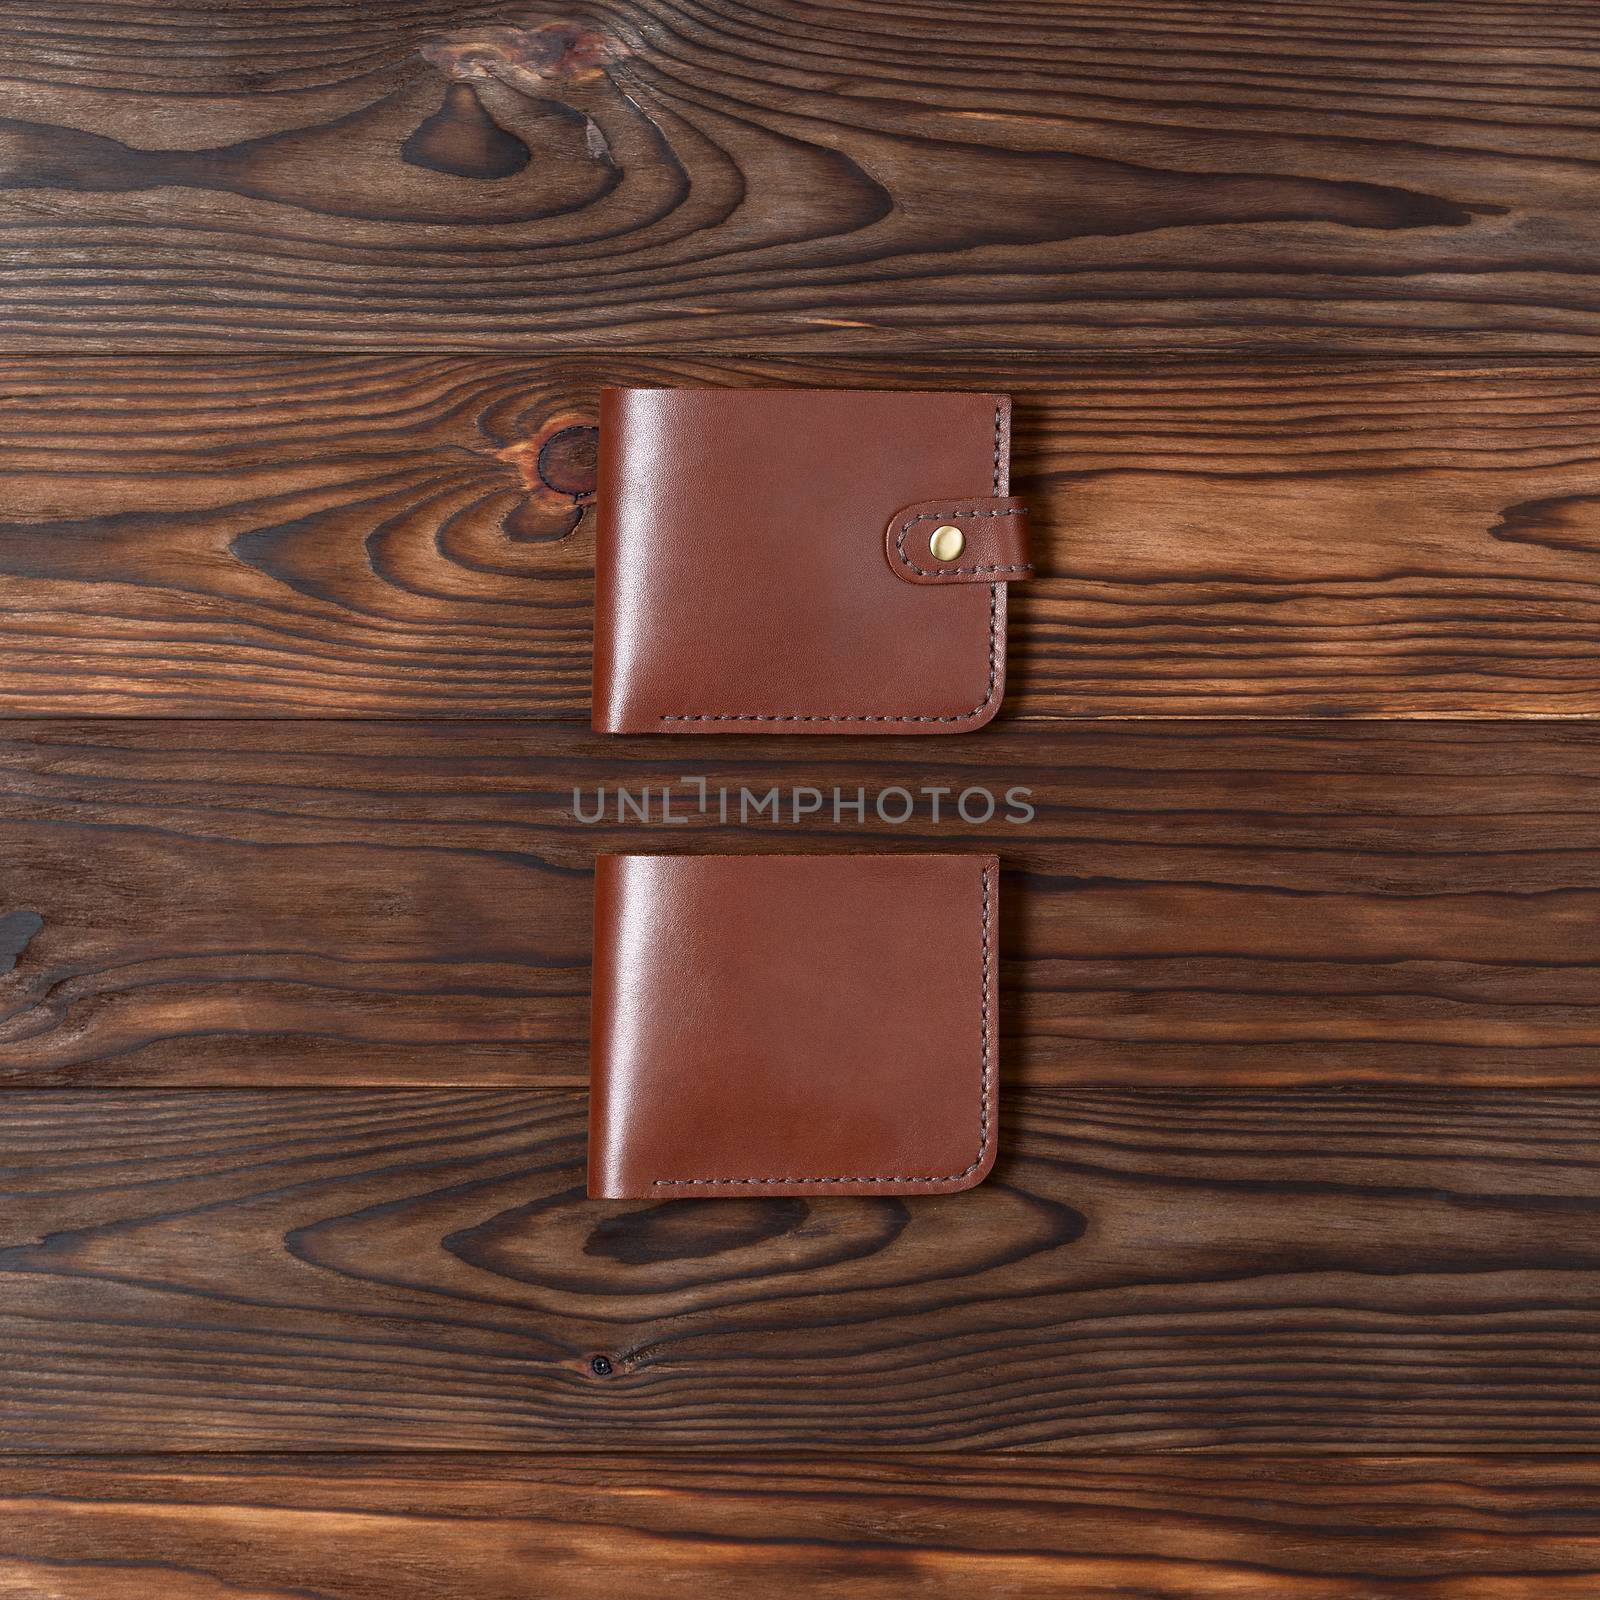 Red color handmade leather gloss wallets on wooden textured background. Up to down view. Wallet stock photo.